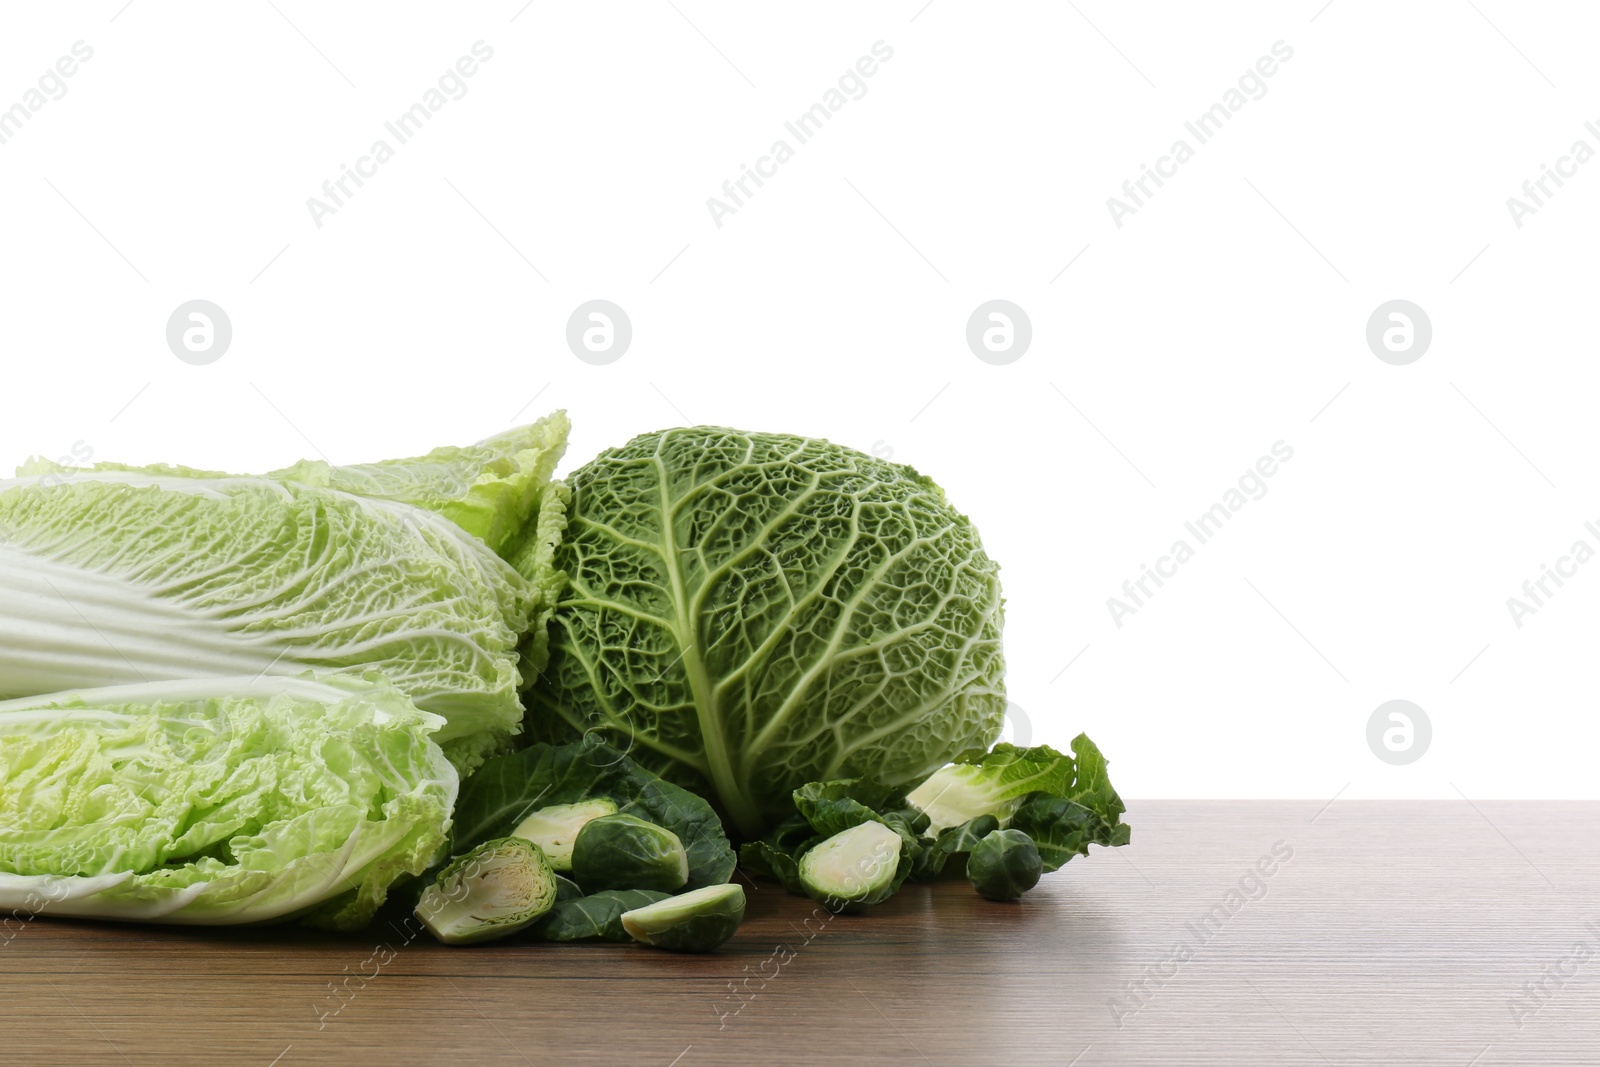 Photo of Different types of cut cabbage on wooden table against white background. Space for text